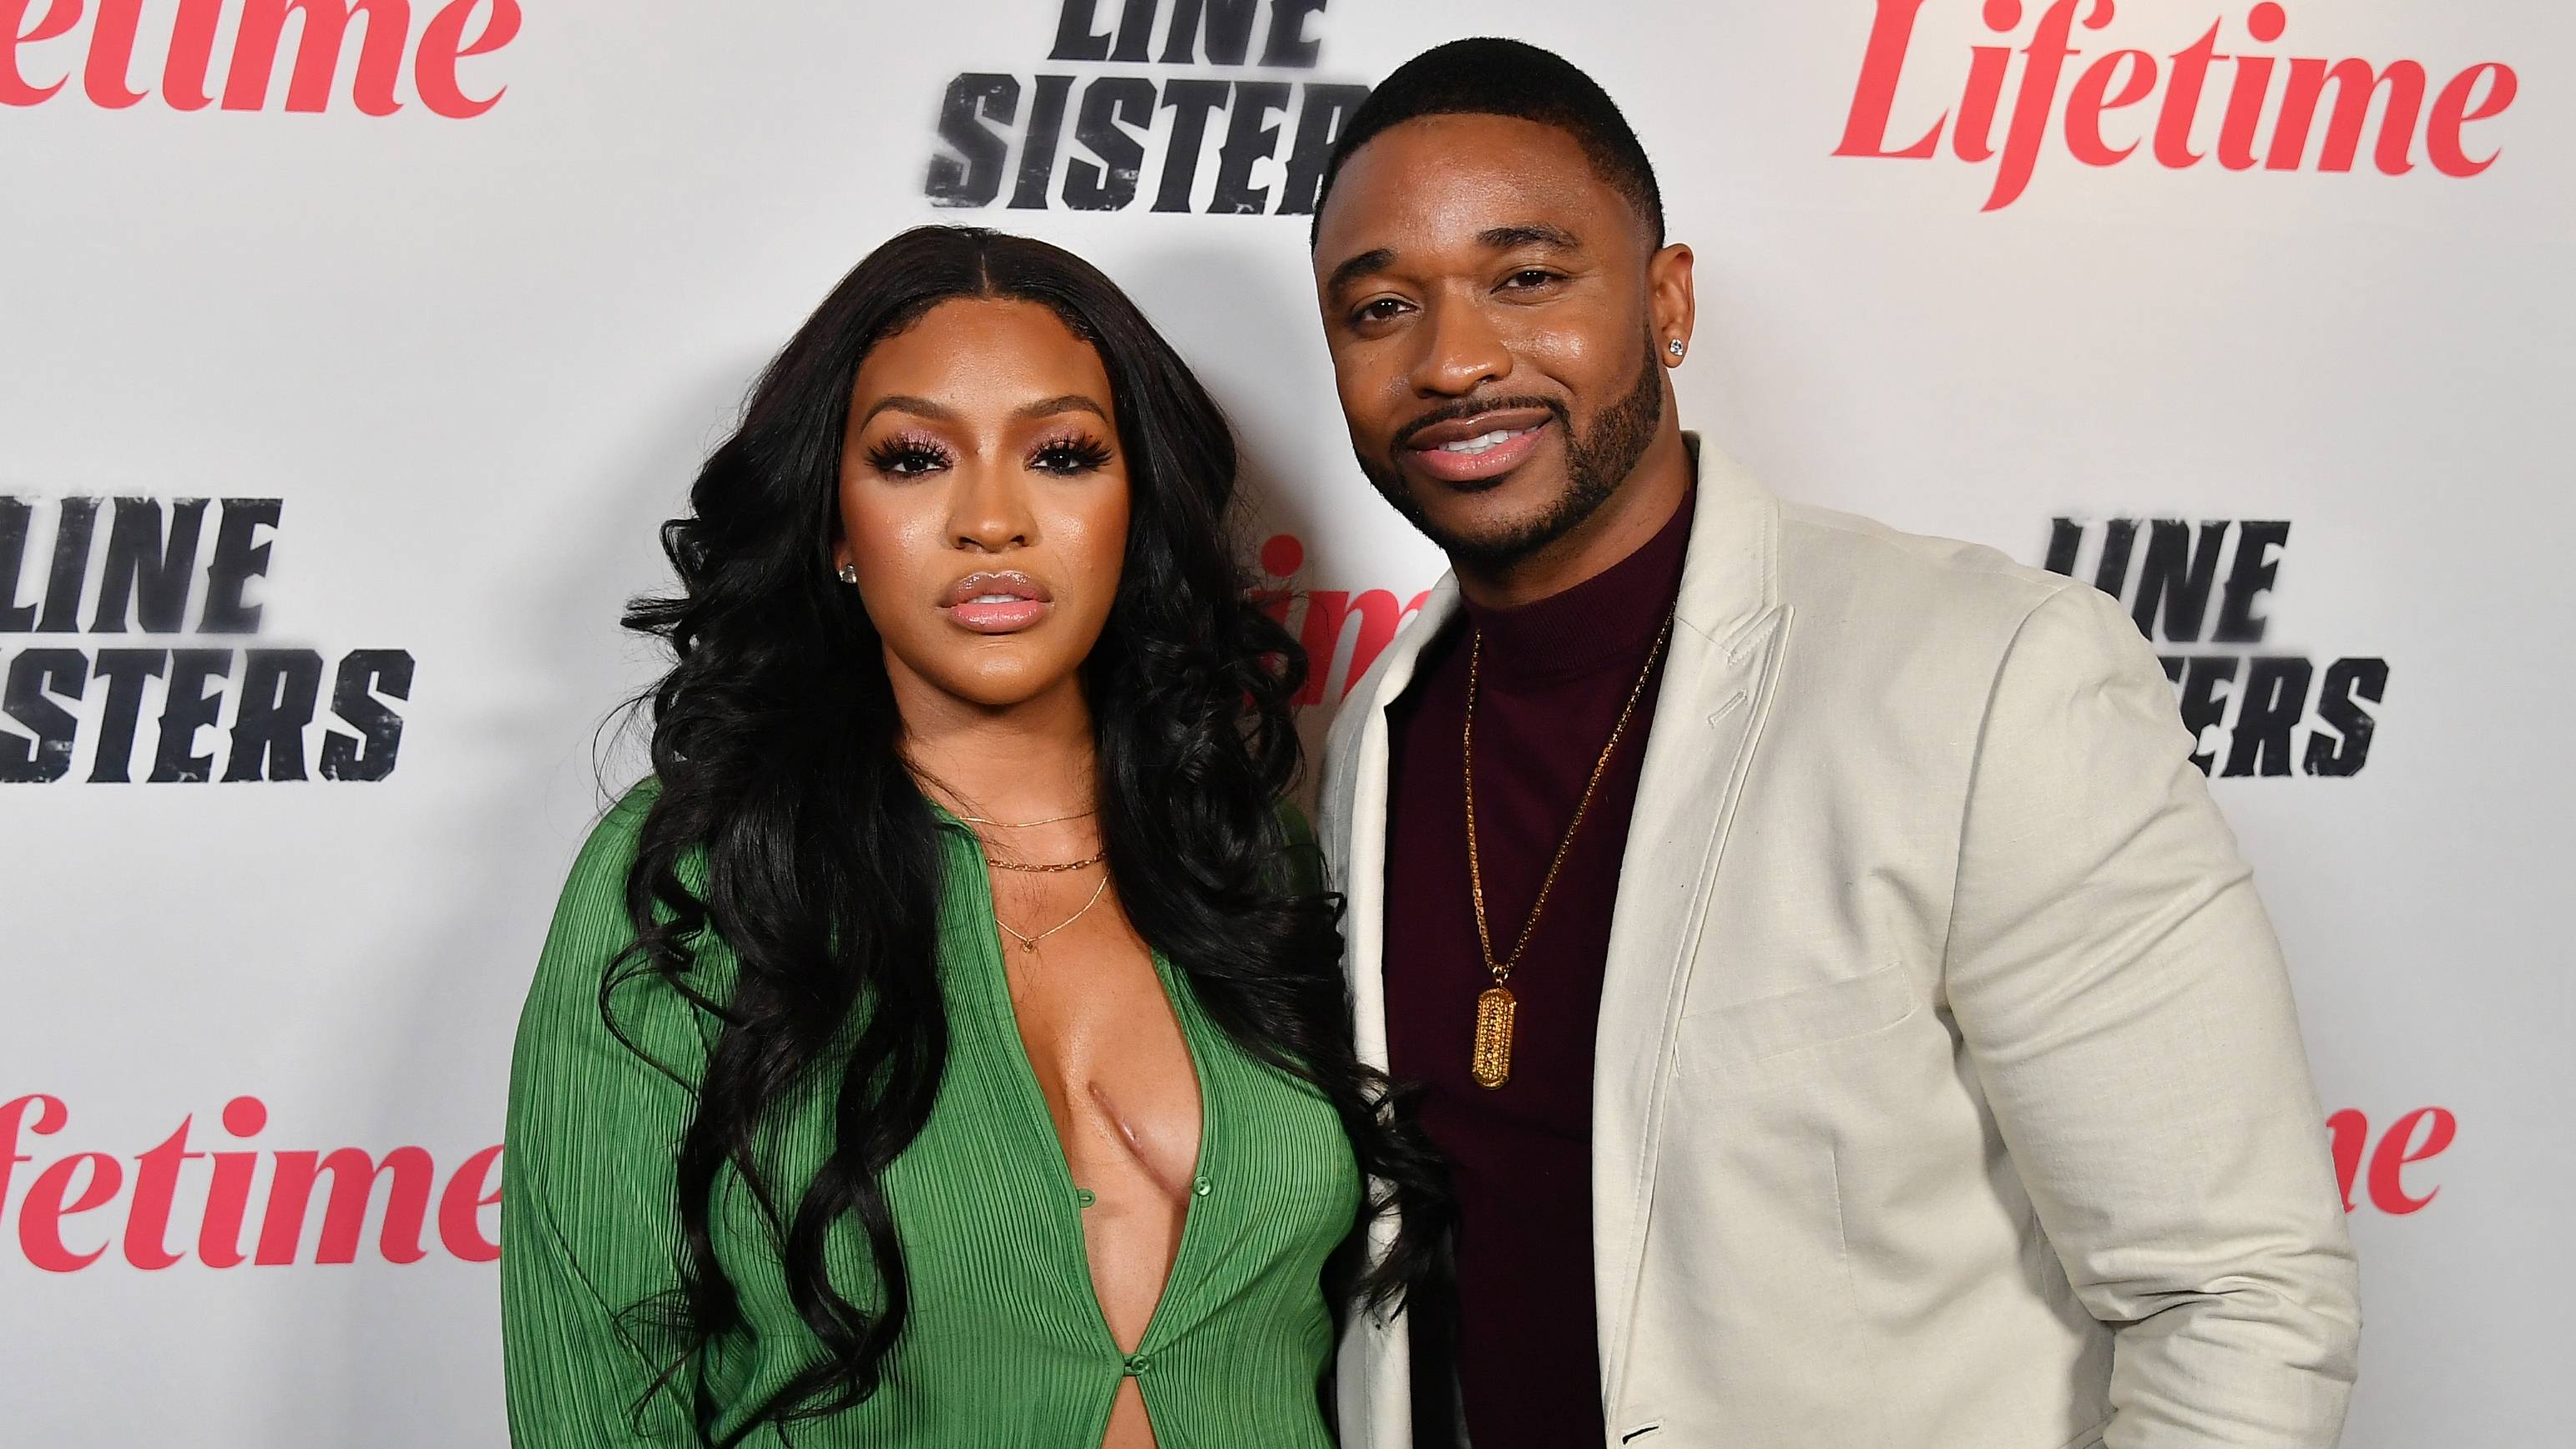 Drew Sidora and Ralph Pittman attend the Atlanta screening of Lifetime's "Line Sisters" at IPIC Theaters at Colony Square on Feb. 10, 2022.